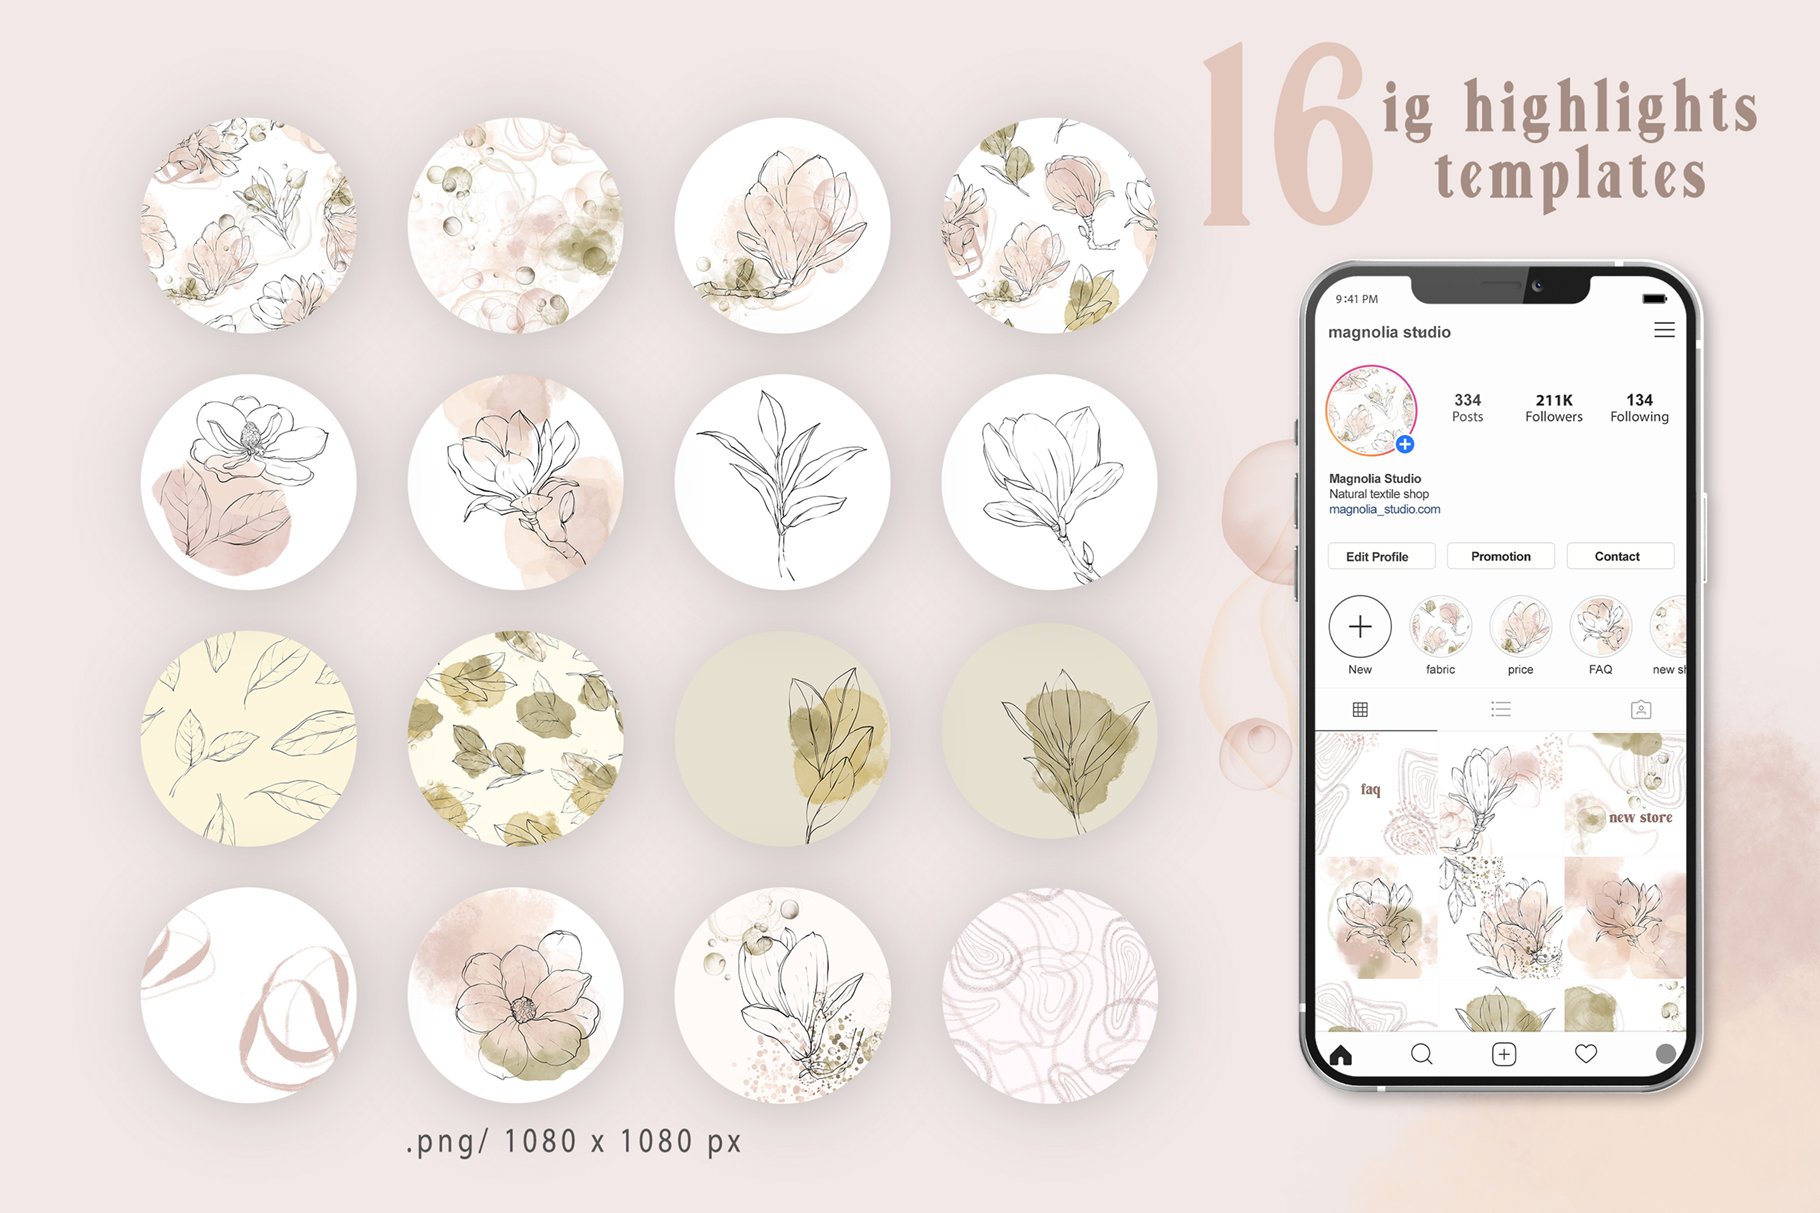 Magnolia Floral Line Art and Abstract Collection